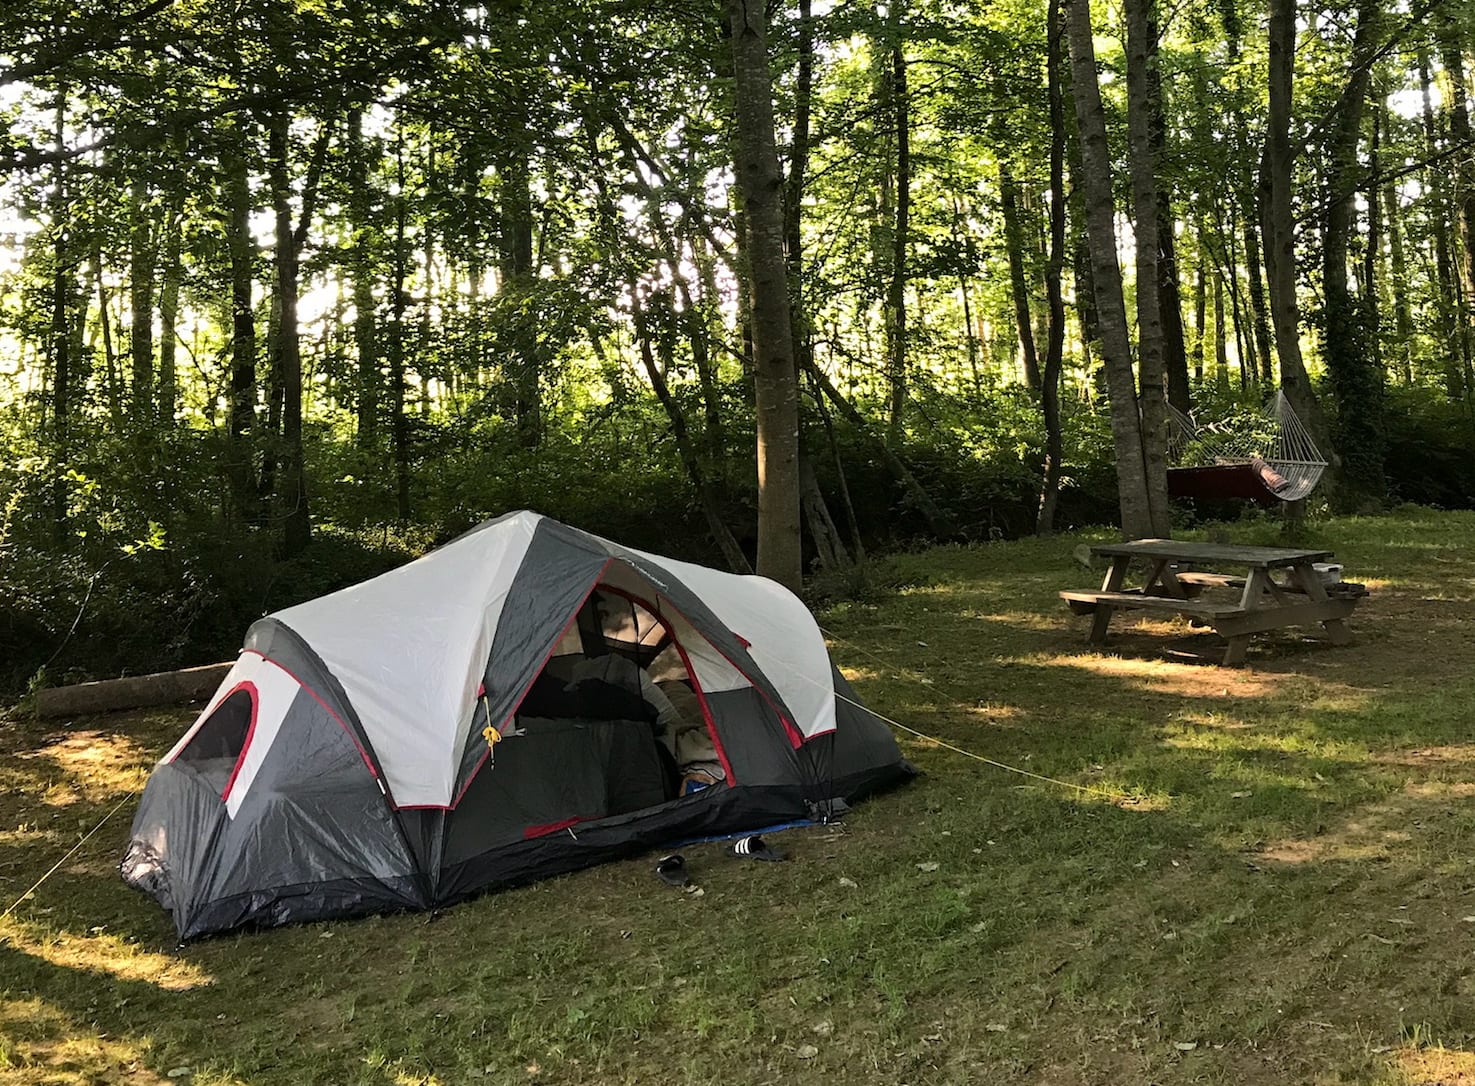 12 Things To Take Camping - Hobbies on a Budget